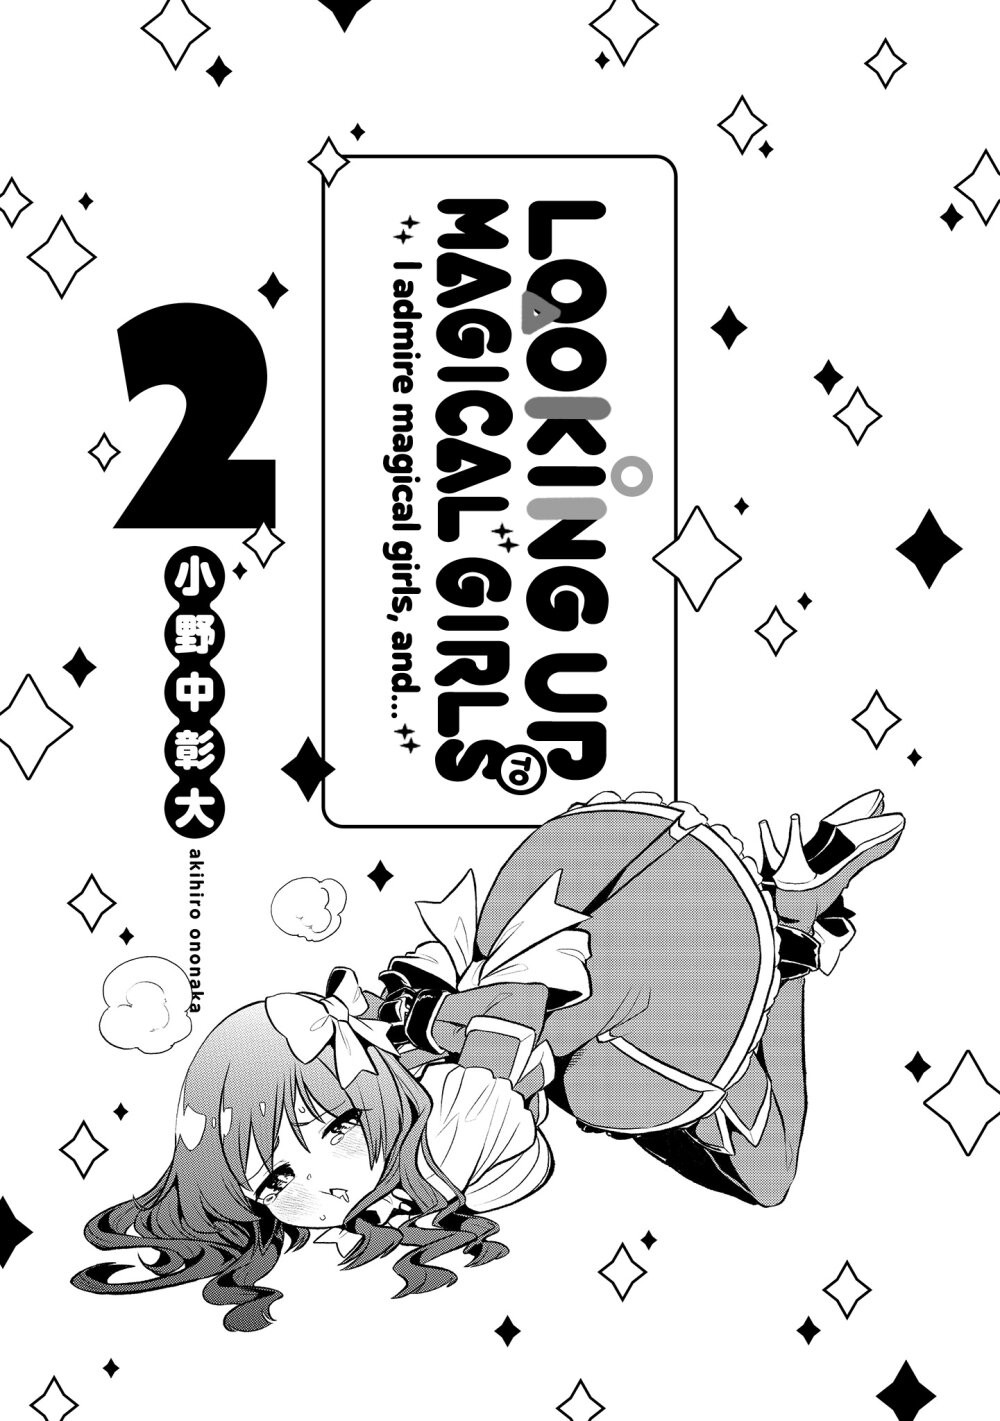 Looking up to Magical Girls 10 5 (3)